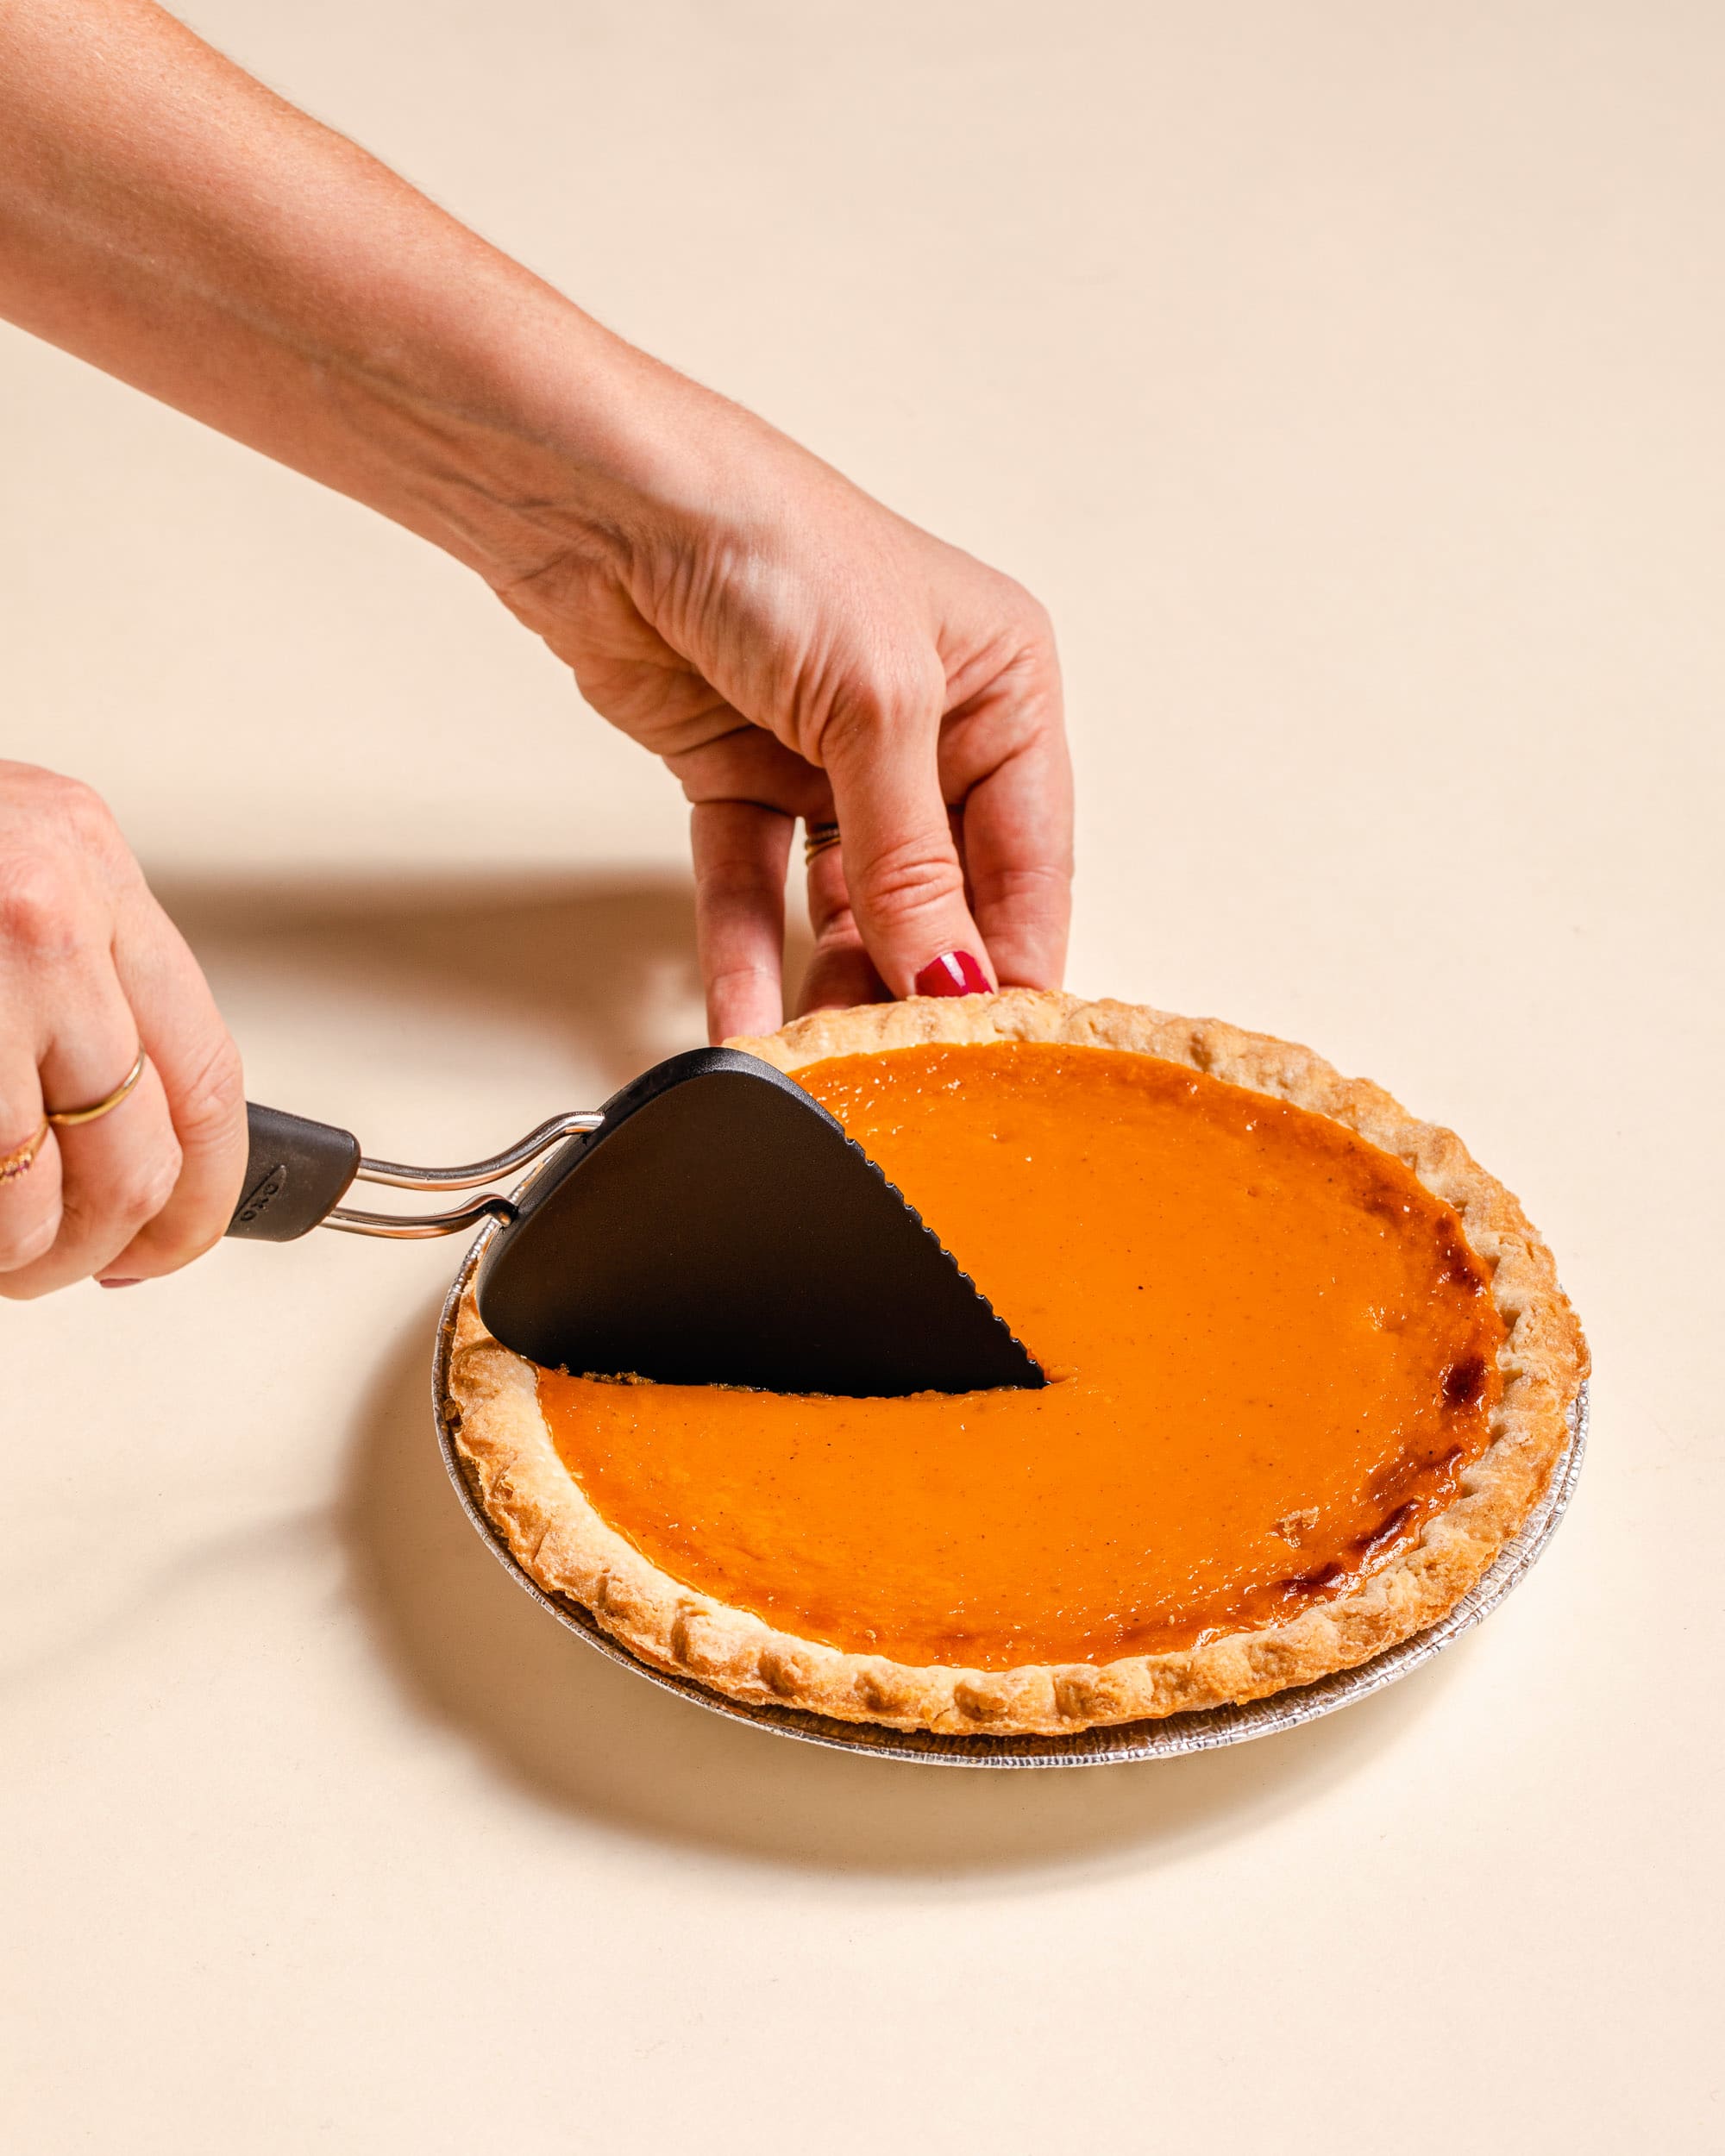 https://cdn.apartmenttherapy.info/image/upload/v1634927594/k/Photo/Lifestyle/2021-11-Showdown-The-Best%20Gadgets-for-Slicing-Perfect-Pieces-of-Pie%20/pie-slicer-showdown-6.jpg